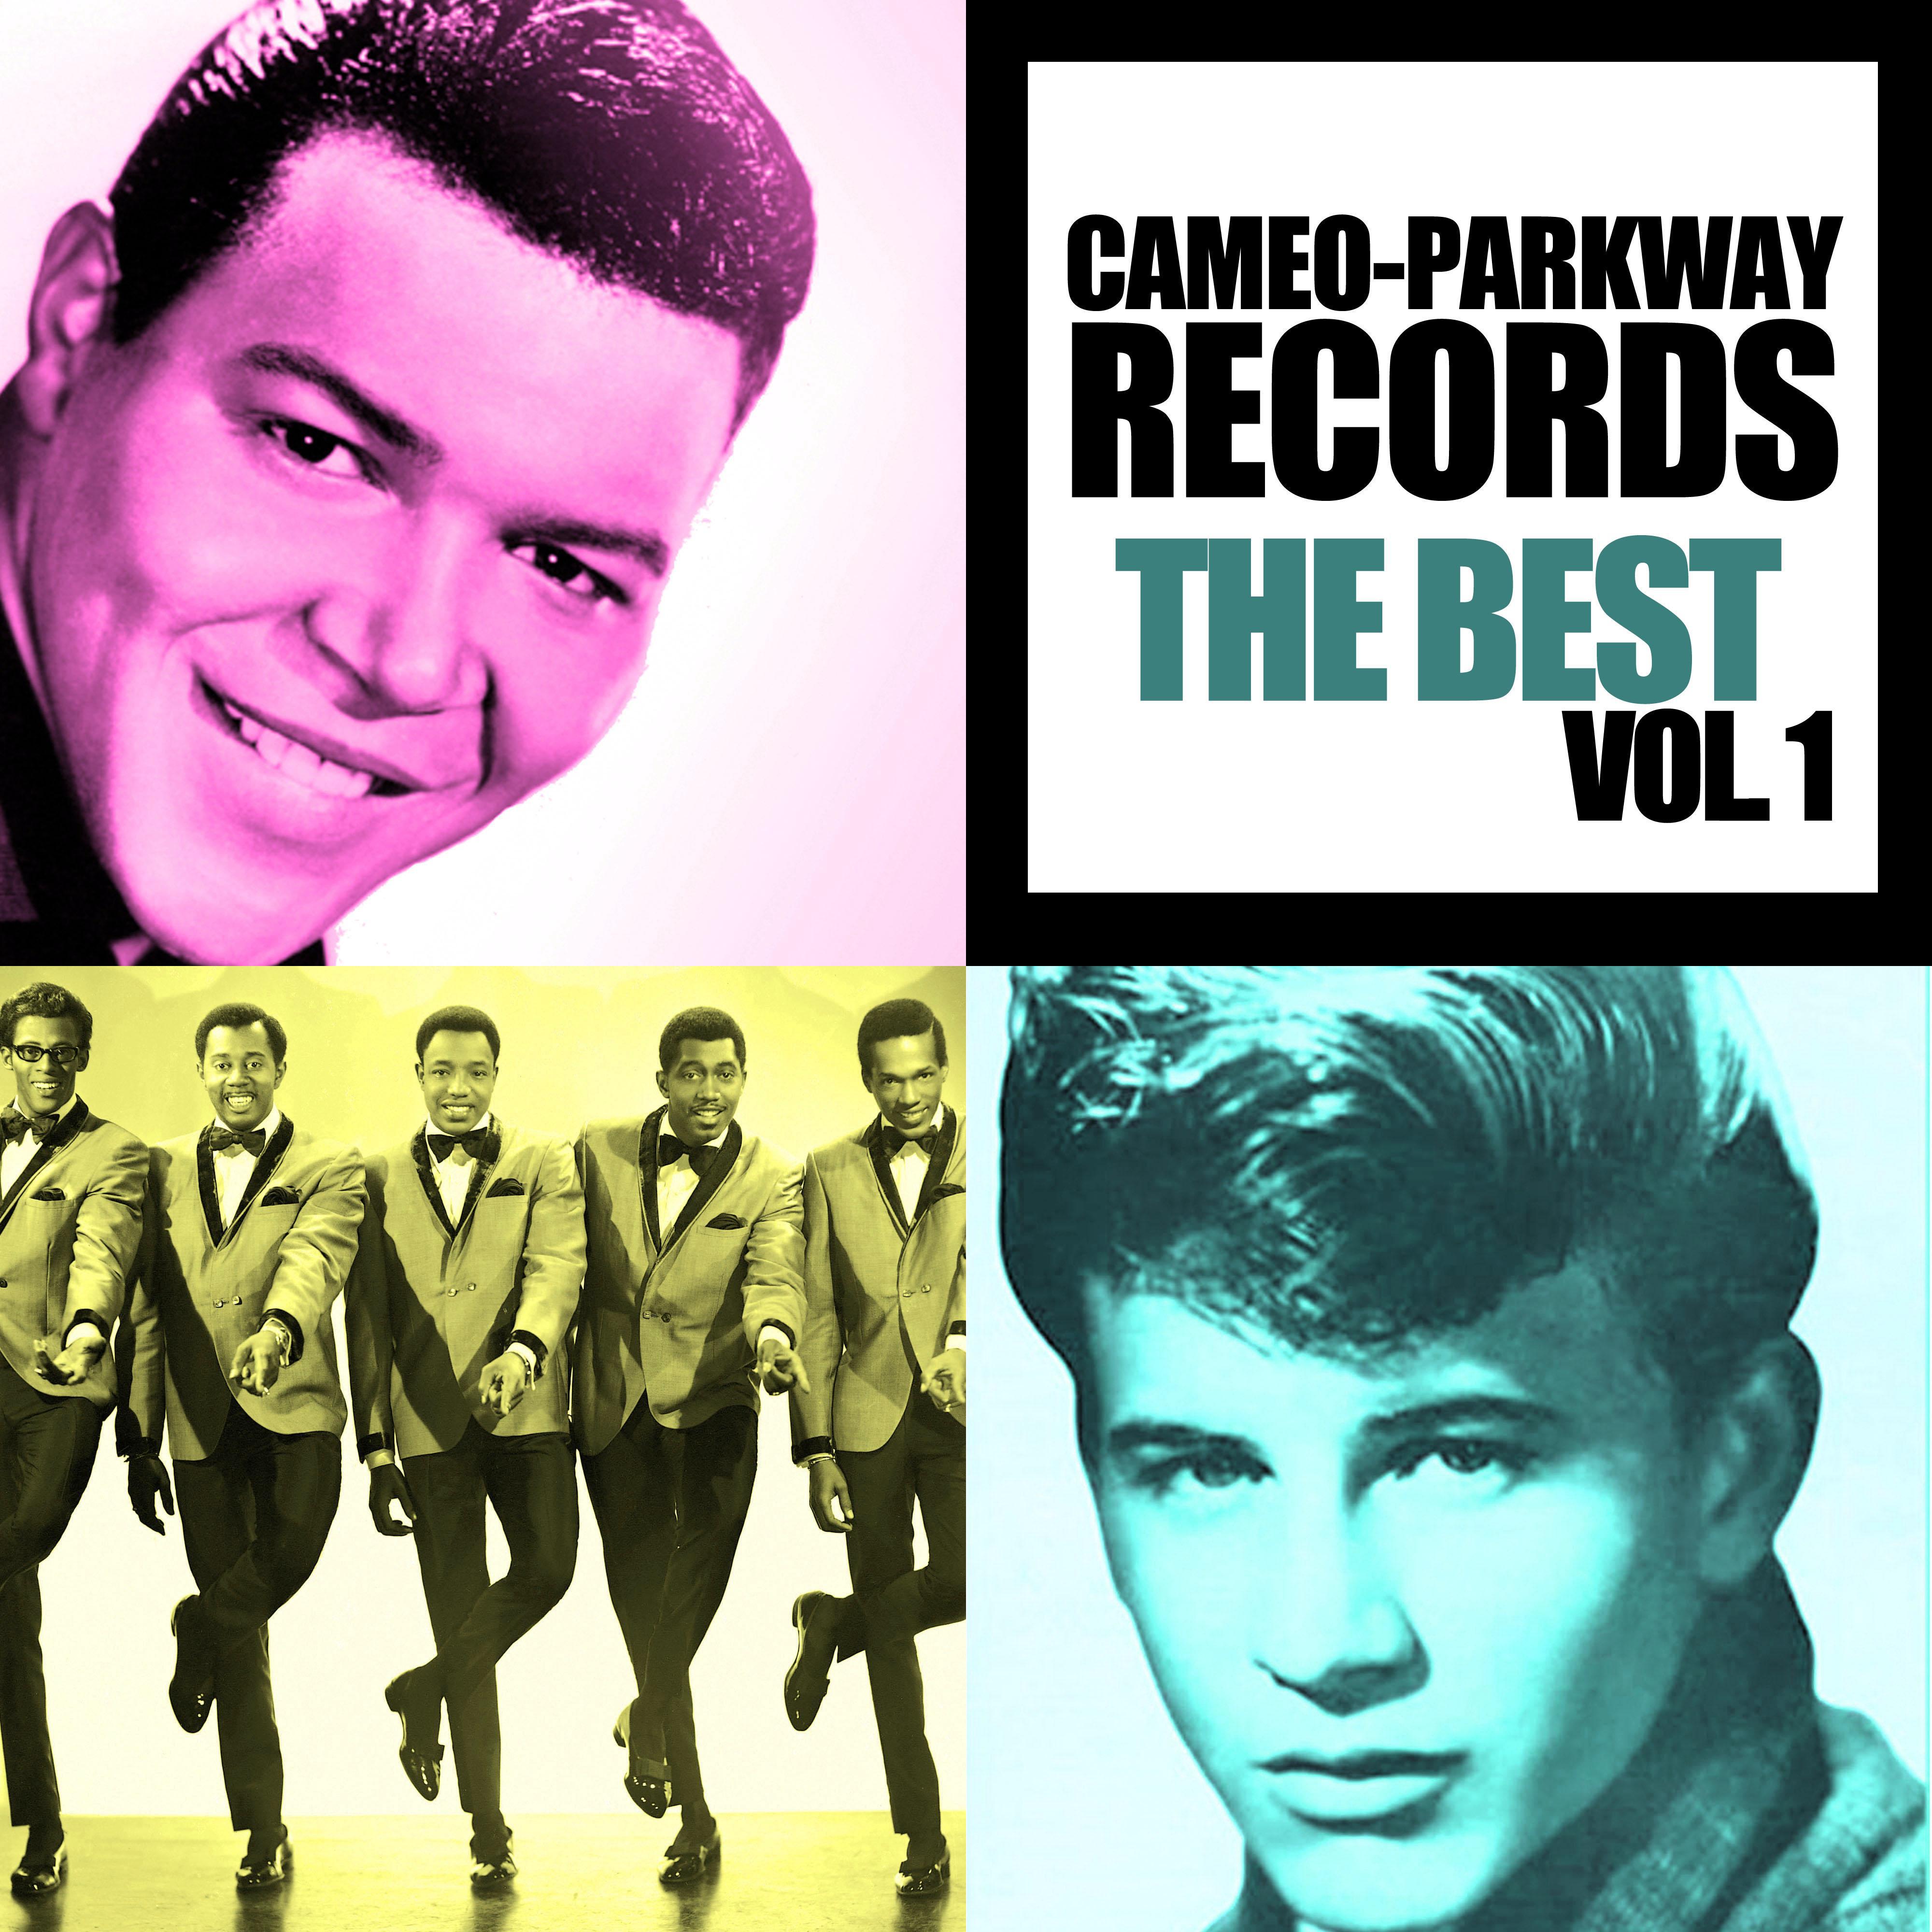 Cameo-Parkway Records: The Best, Vol. 1